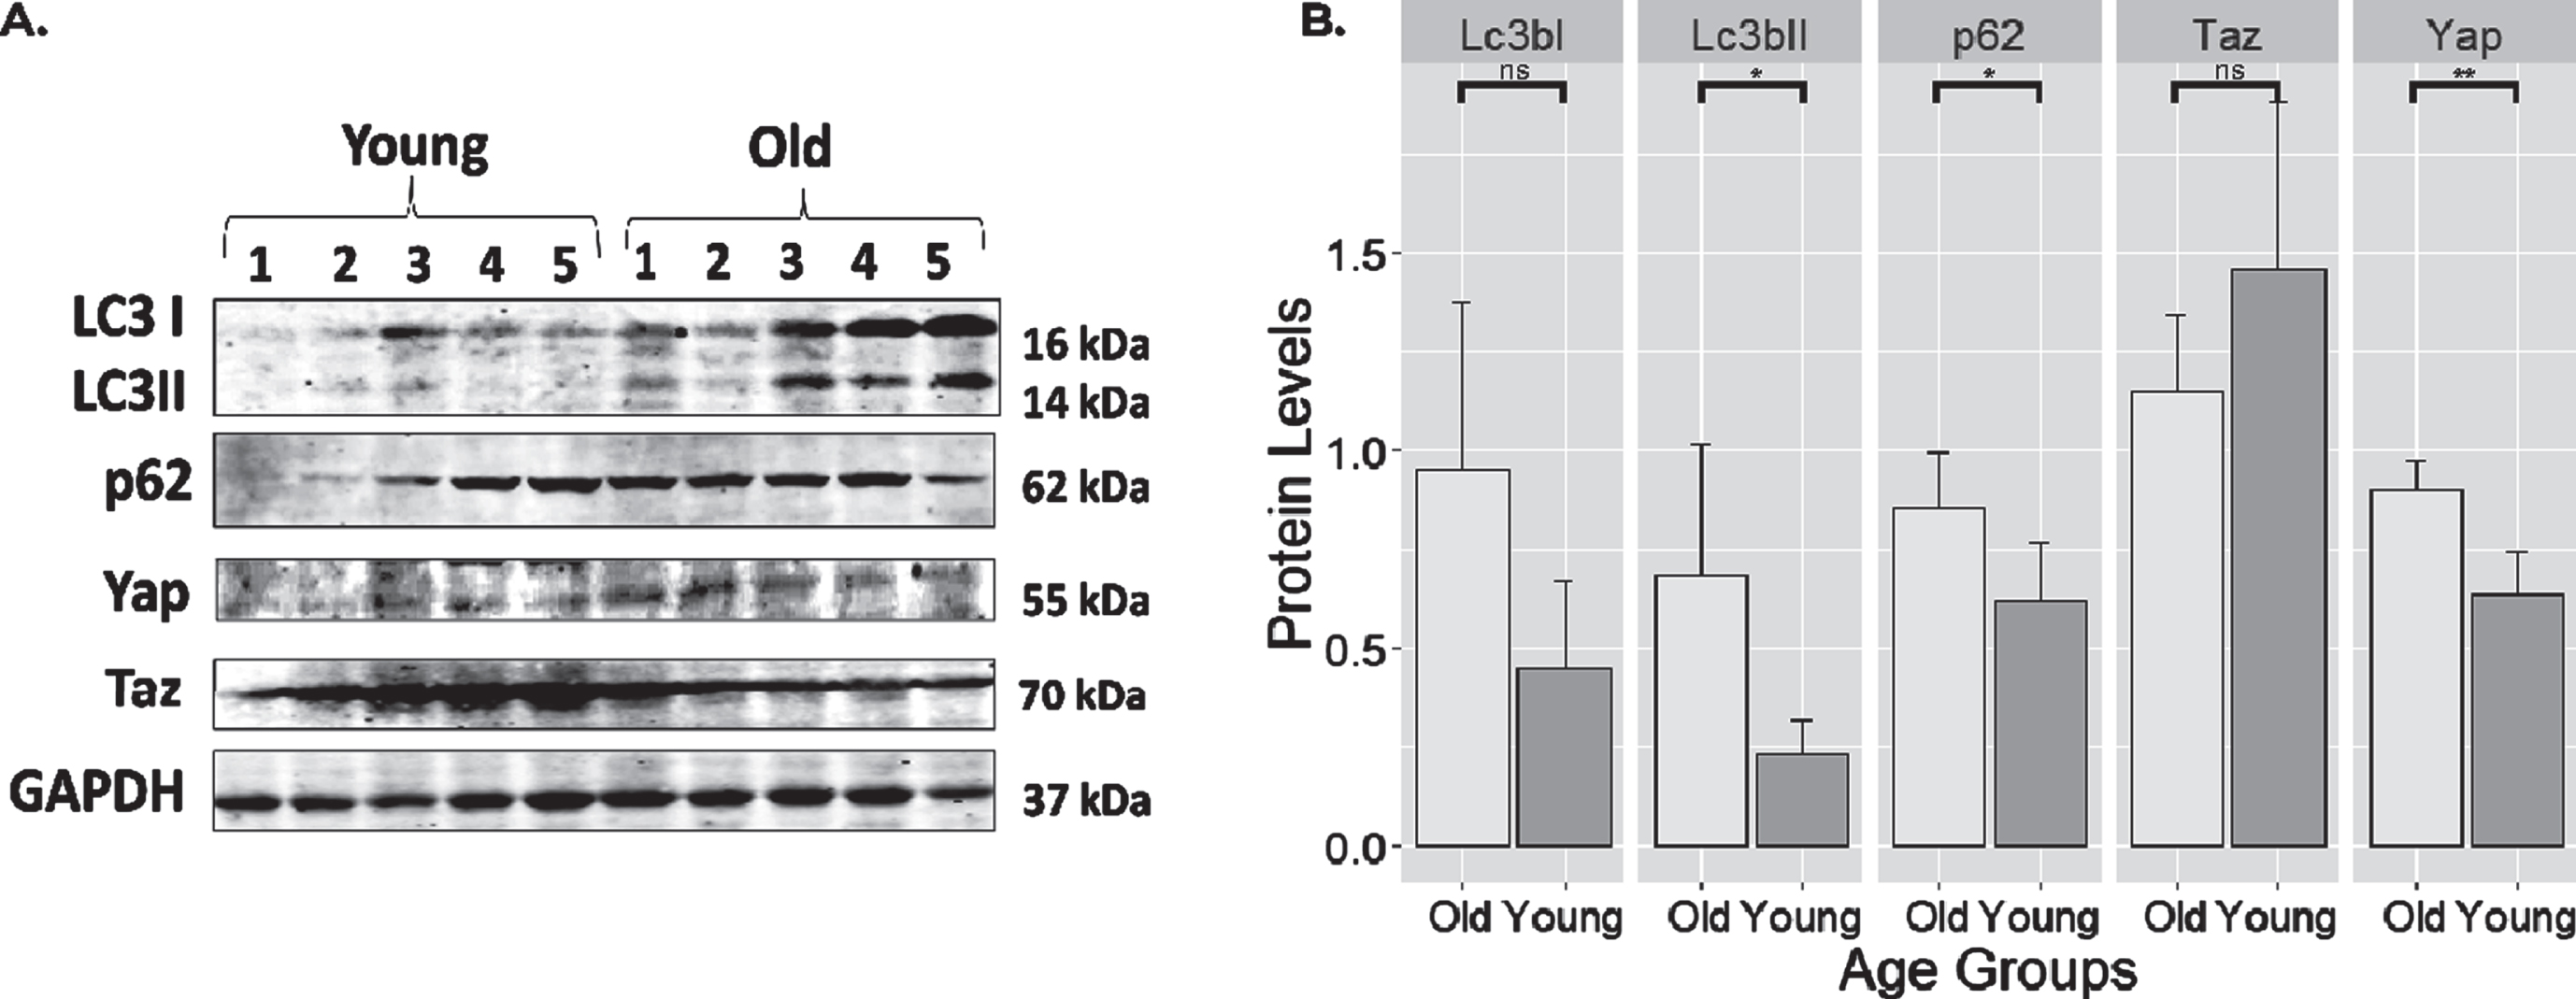 Expression of select proteins from old and young rat skeletal muscle. (A) Full blot of Lc3, p62, Yap, Taz, and Gapdh. (B) protein expression levels normalized to Gapdh. Notice that autophagy markers such as Lc3bII (p < 0.05; 0.45 (0.046–0.857)) and p62 (p < 0.05; 0.233 (0.022–0.445)) markers were highly expressed in old muscle. Yap also has a higher expression (p < 0.01; 0.267(0.129–0.405)) in old rats compared to younger controls. The levels of Lc3bI and Taz were unchanged. **: highly significant differences with the level of p < 0.01. *: significant difference compared at the level of p < 0.05. ns: no significant differences with the level of p > 0.05. Error bars: standard deviation.